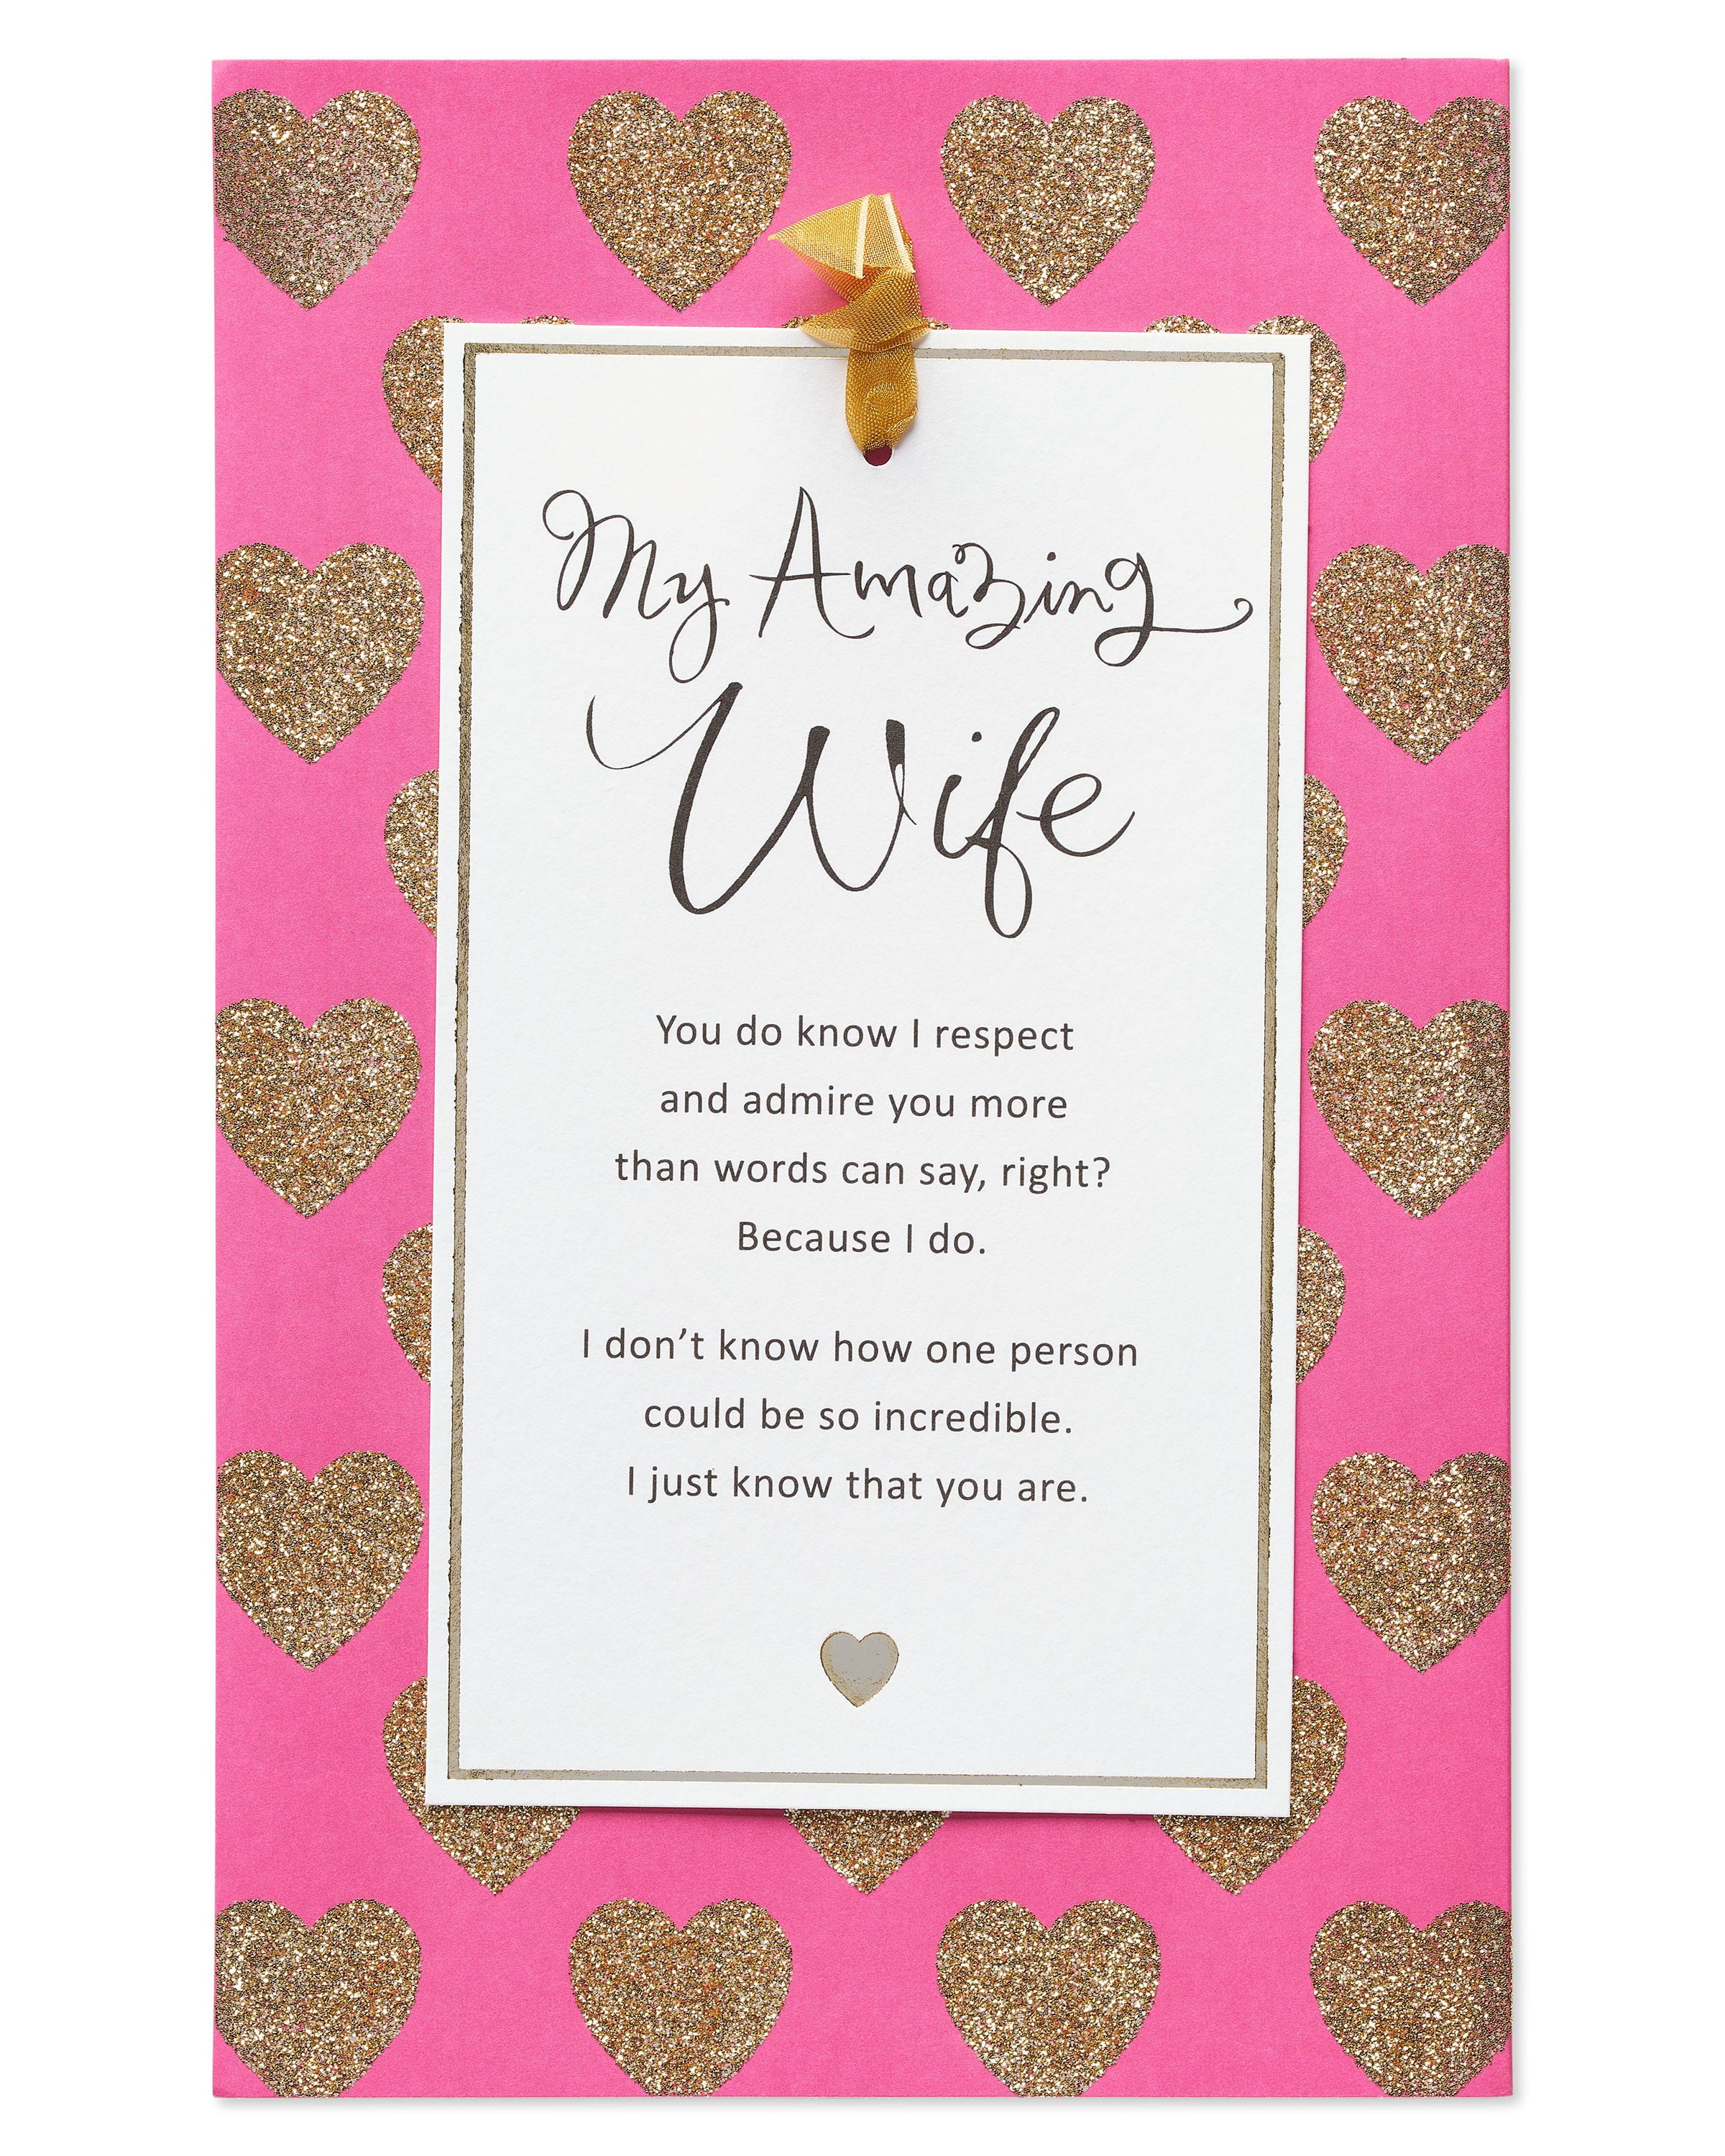 american-greetings-hearts-anniversary-card-for-wife-with-foil-walmart